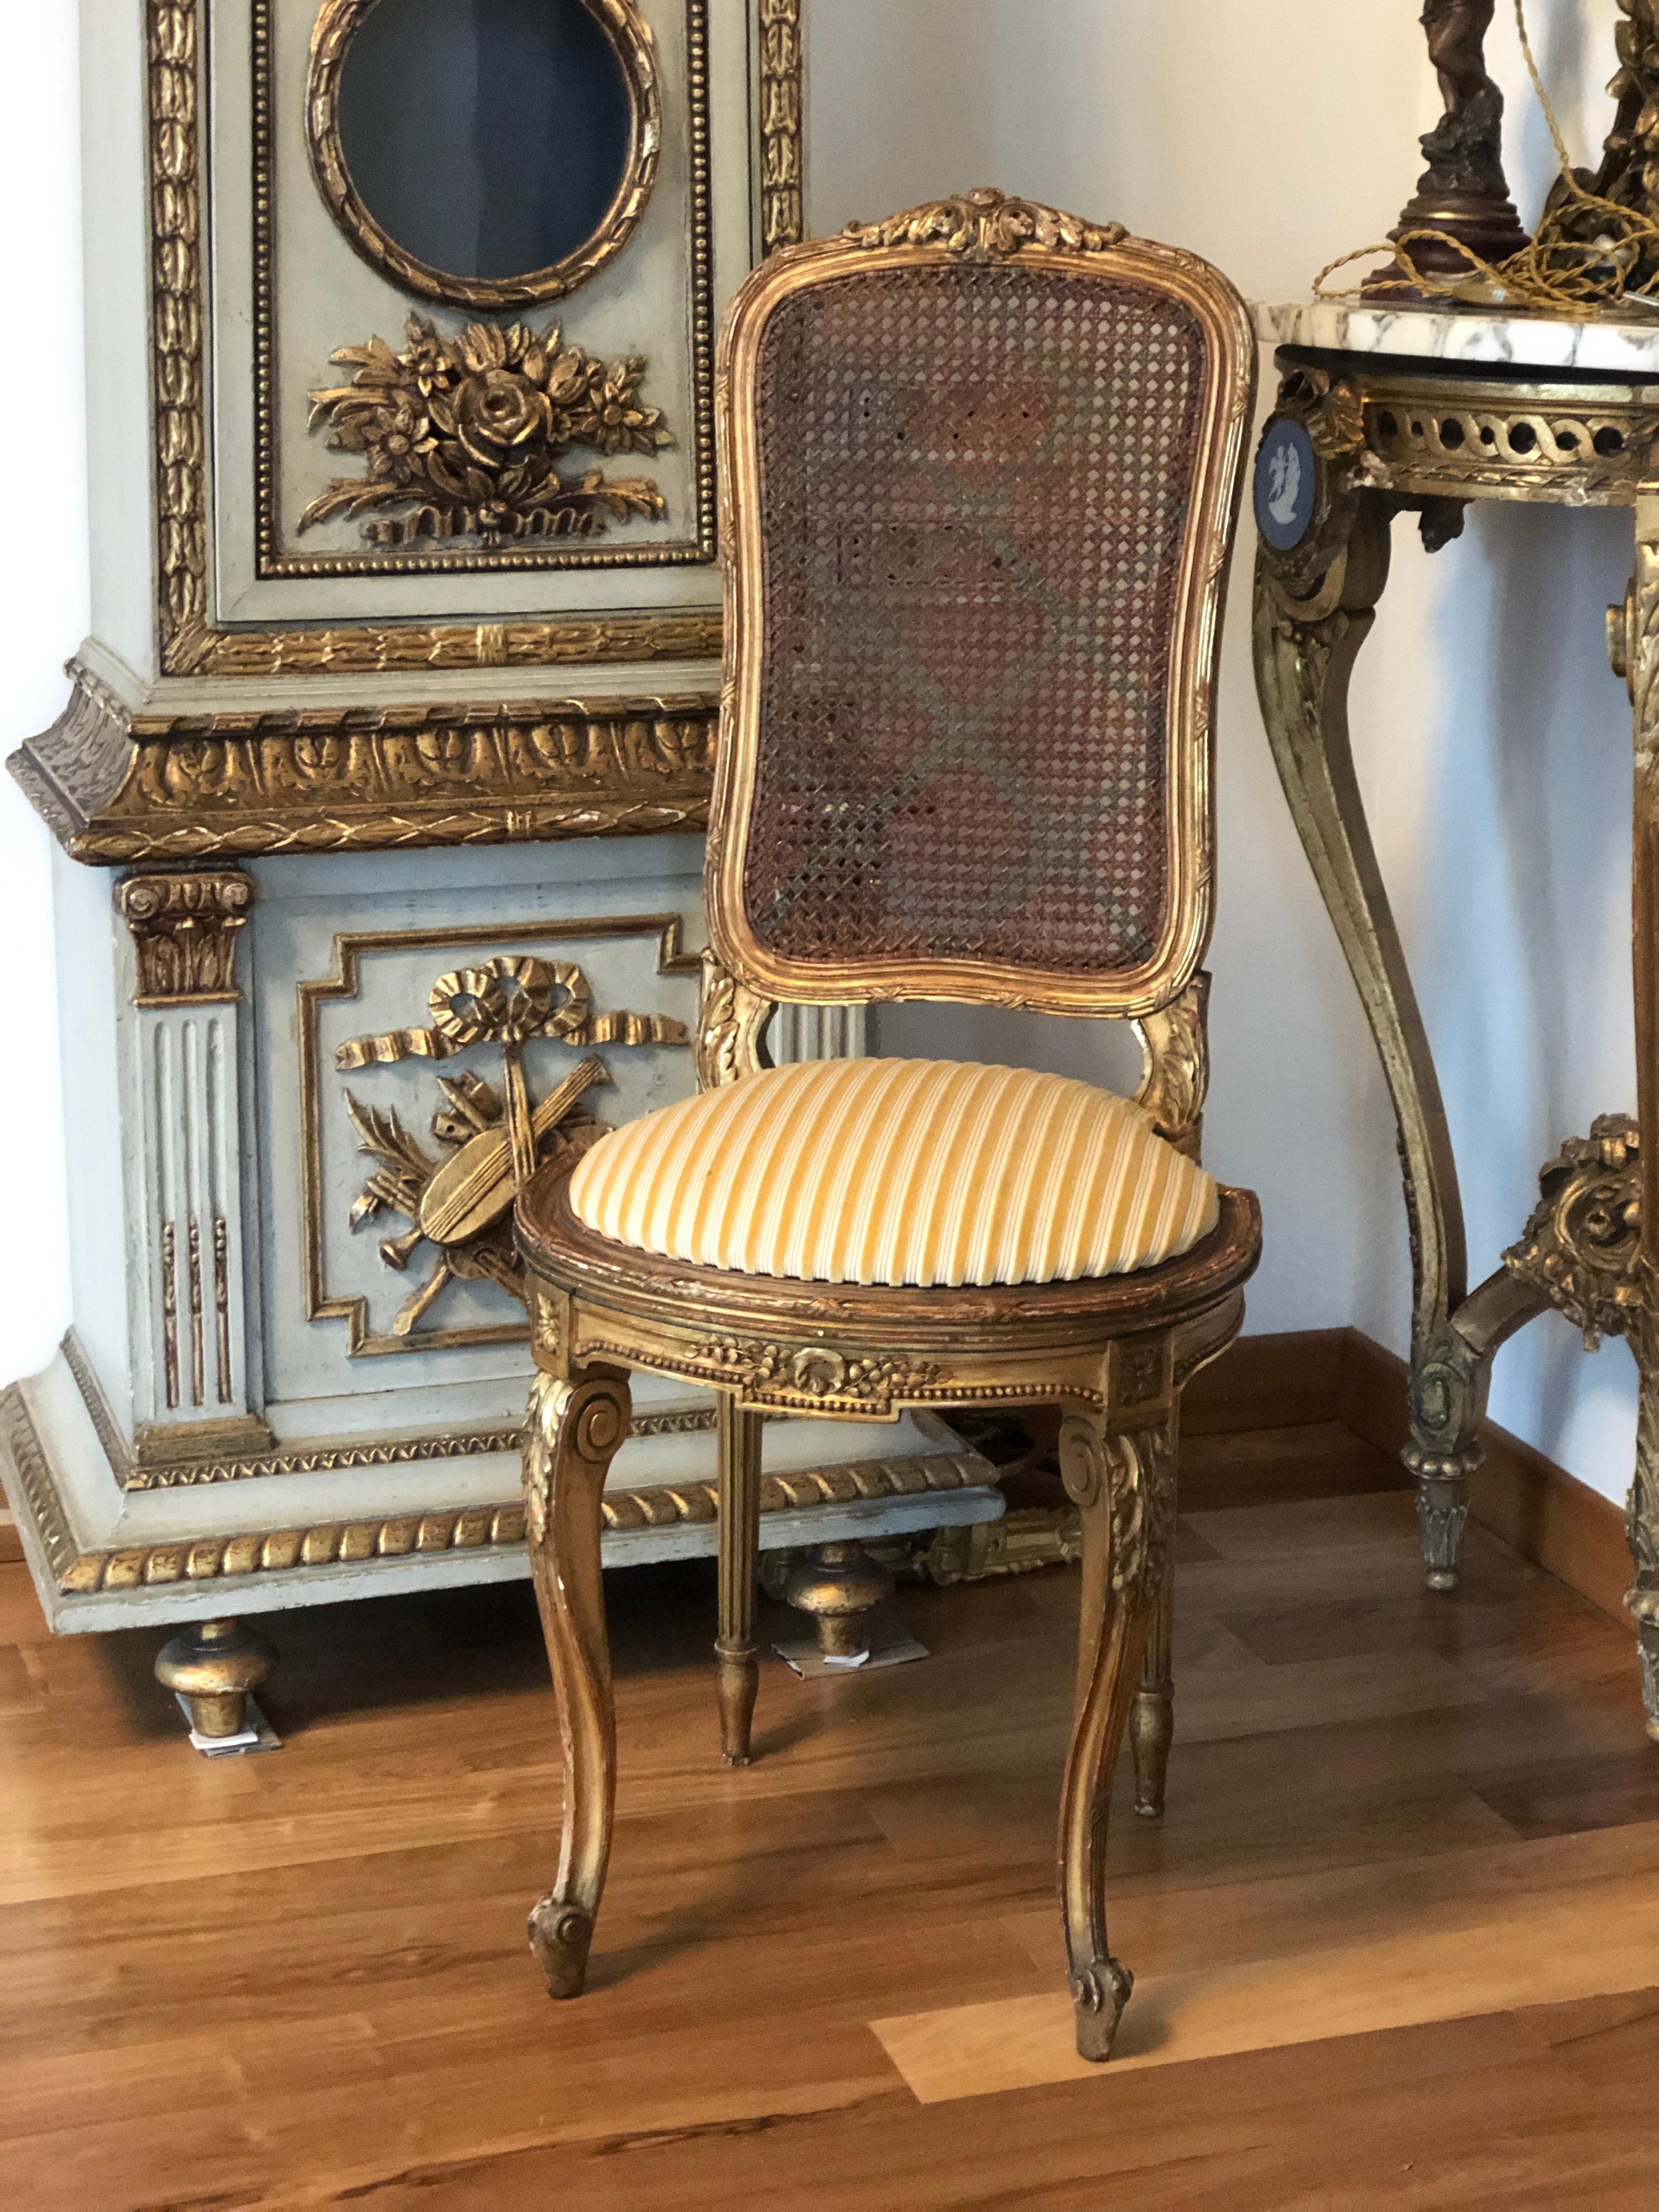 Petite French ballroom side chair, in Louis XVI style having a giltwood frame with carved floral ornaments. The front legs are curved and the seat is semi round in front having a cushion in mustard velvet stripes. The back and the seat are caned and